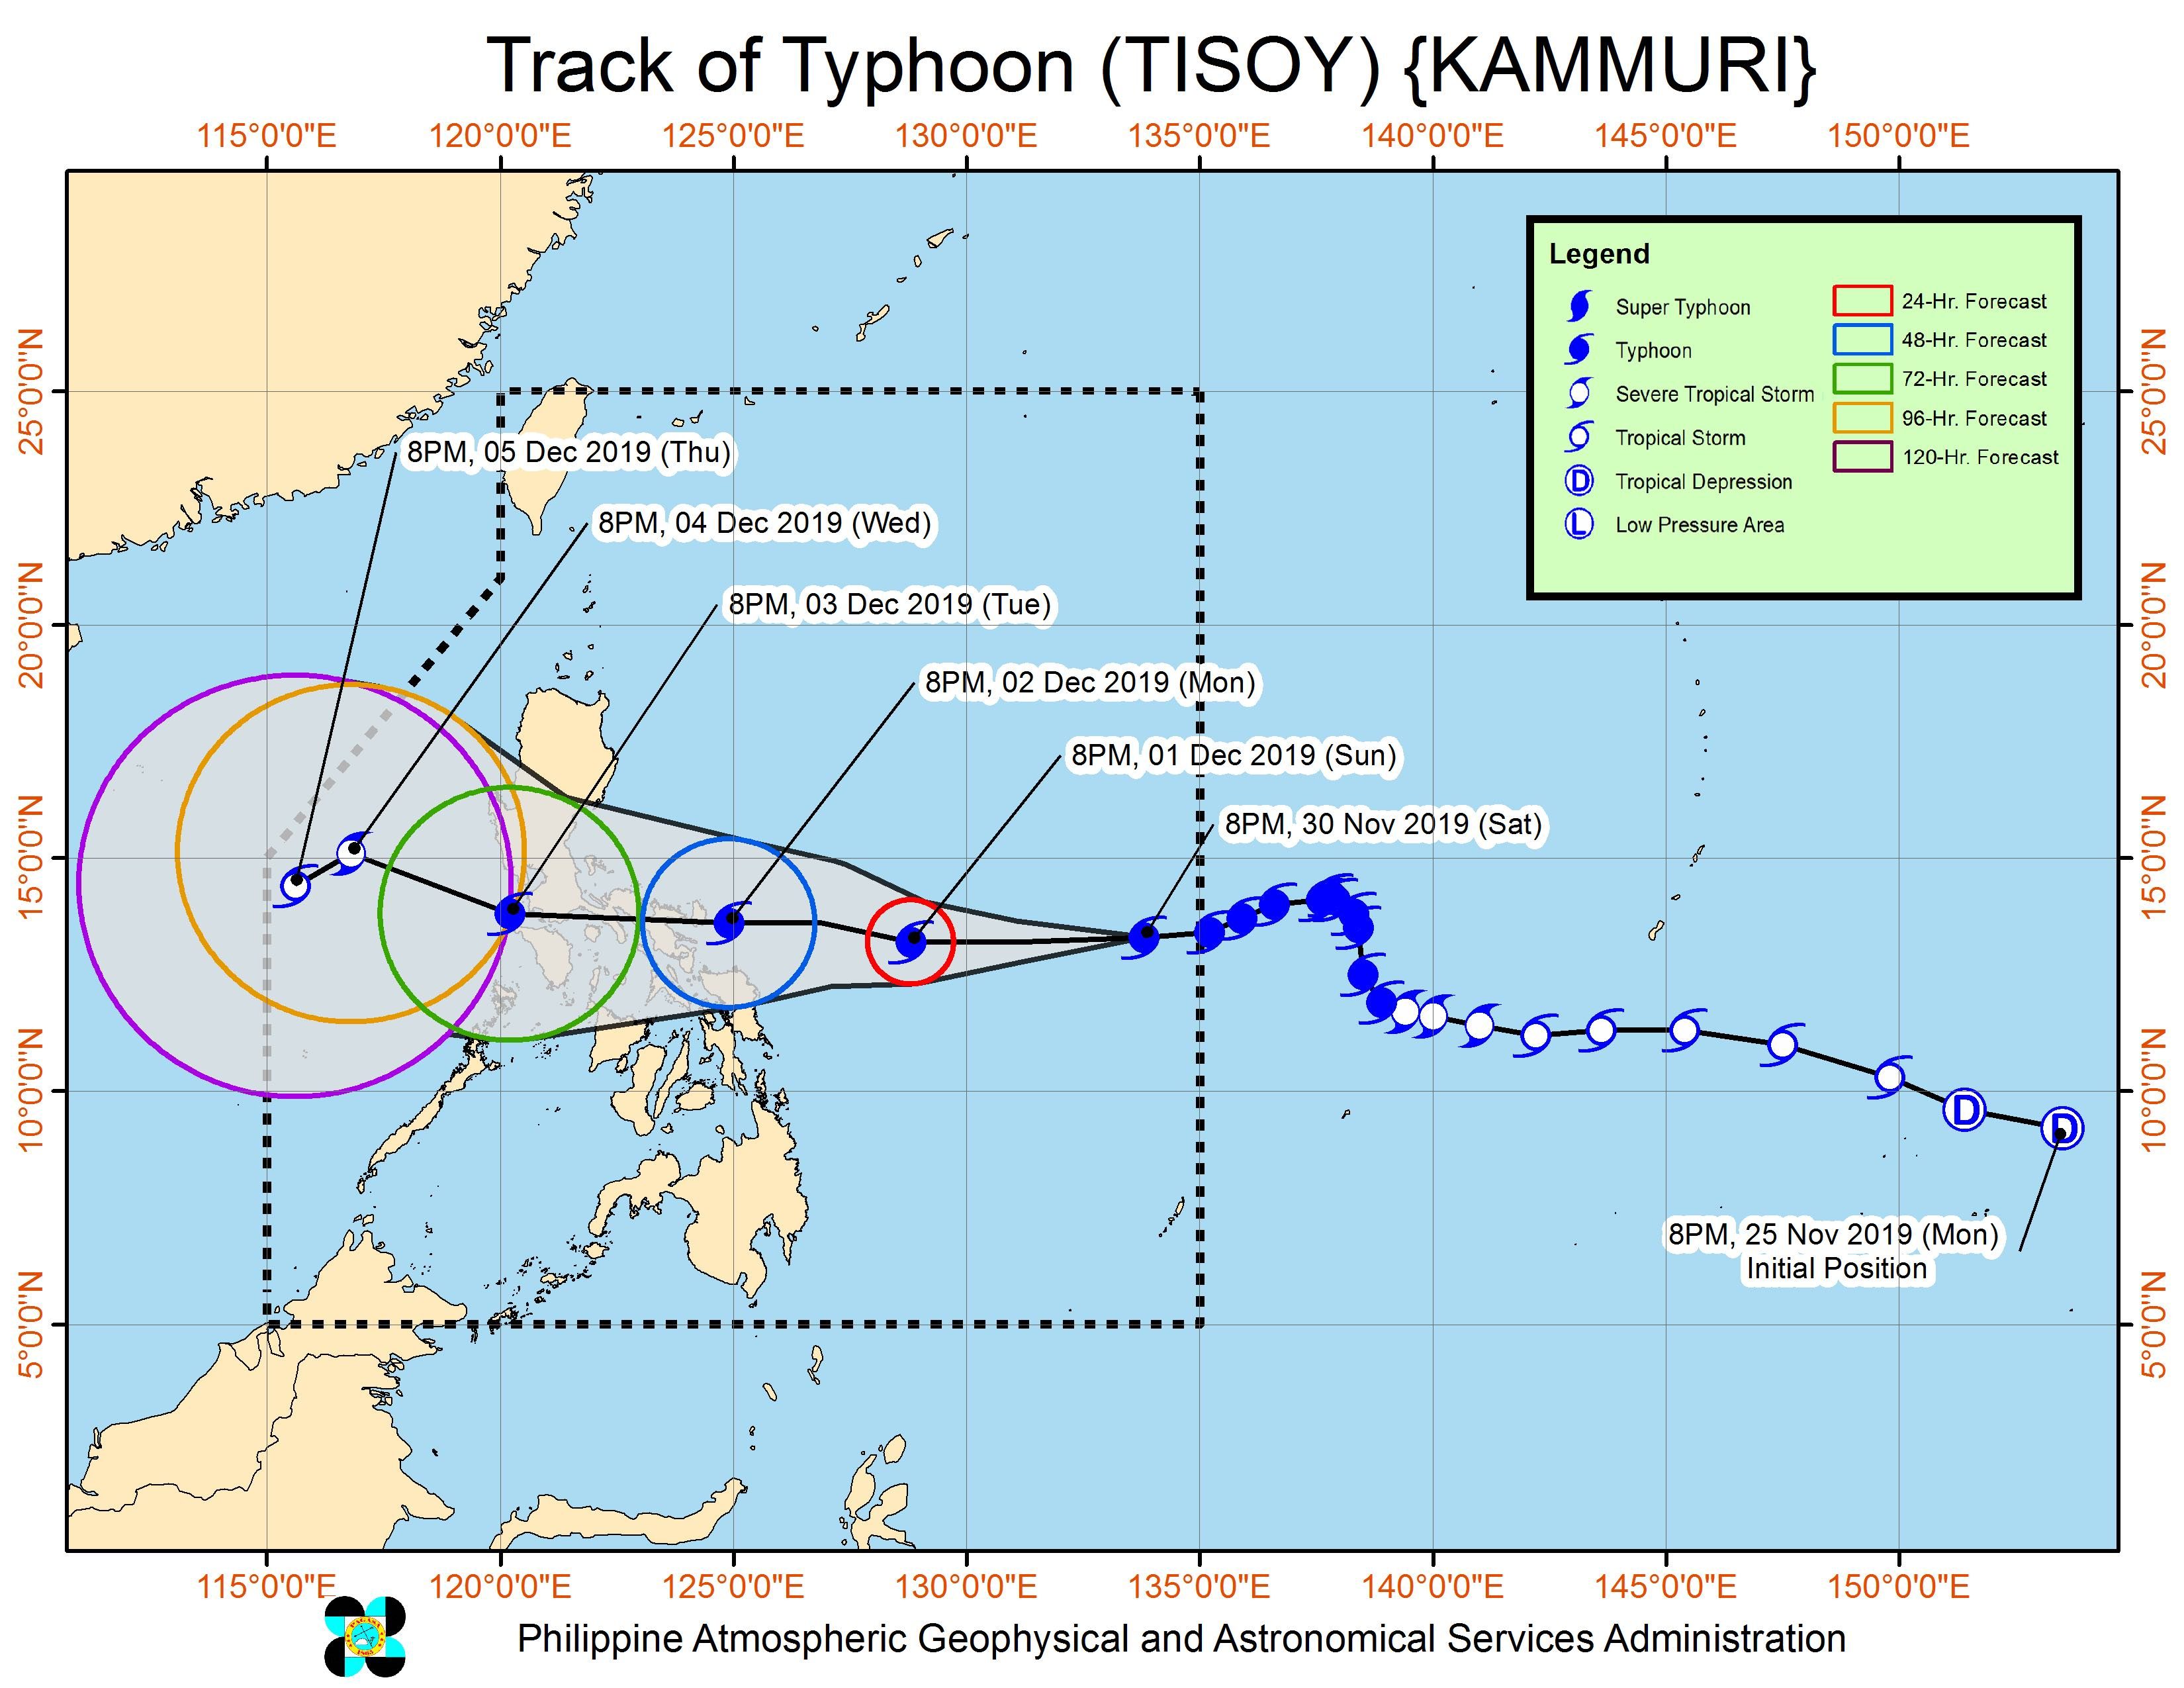 Forecast track of Typhoon Tisoy (Kammuri) as of November 30, 2019, 11 pm. Image from PAGASA 